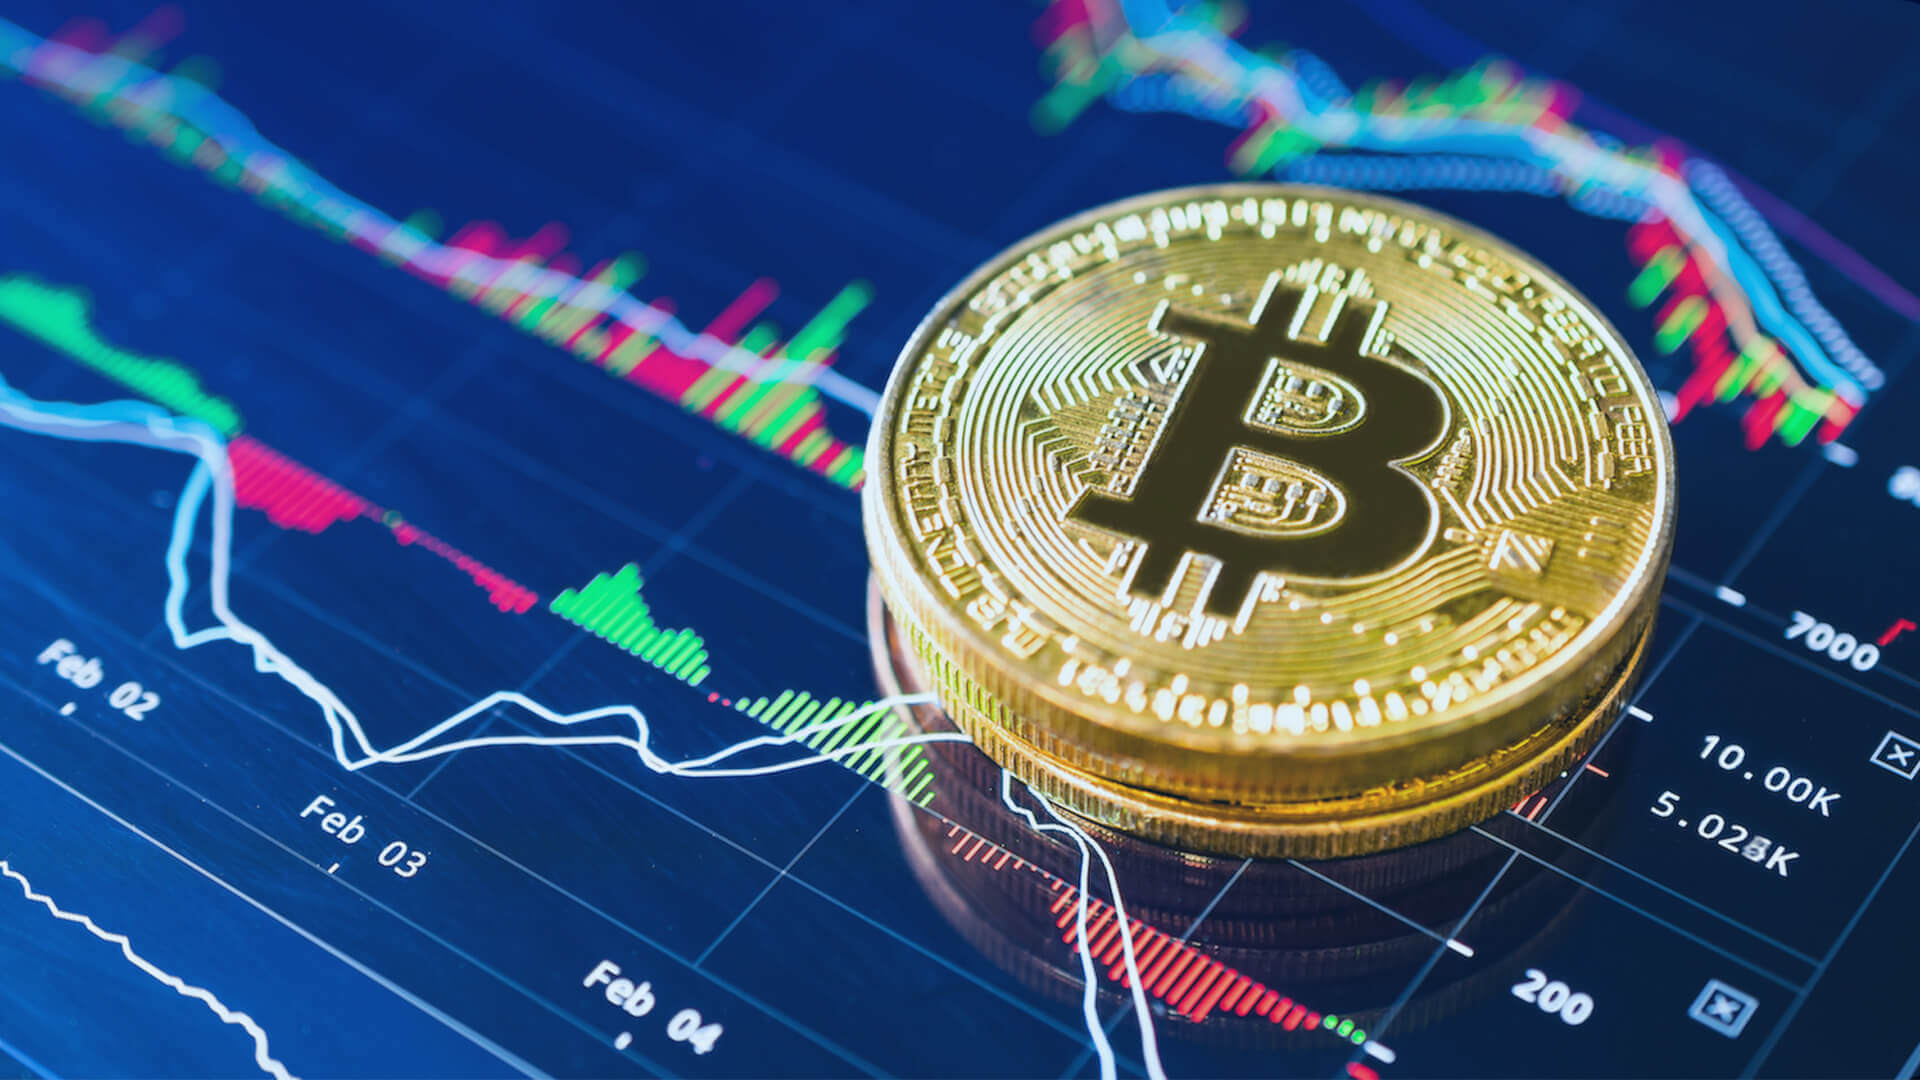 Bitcoin trading – the benefits